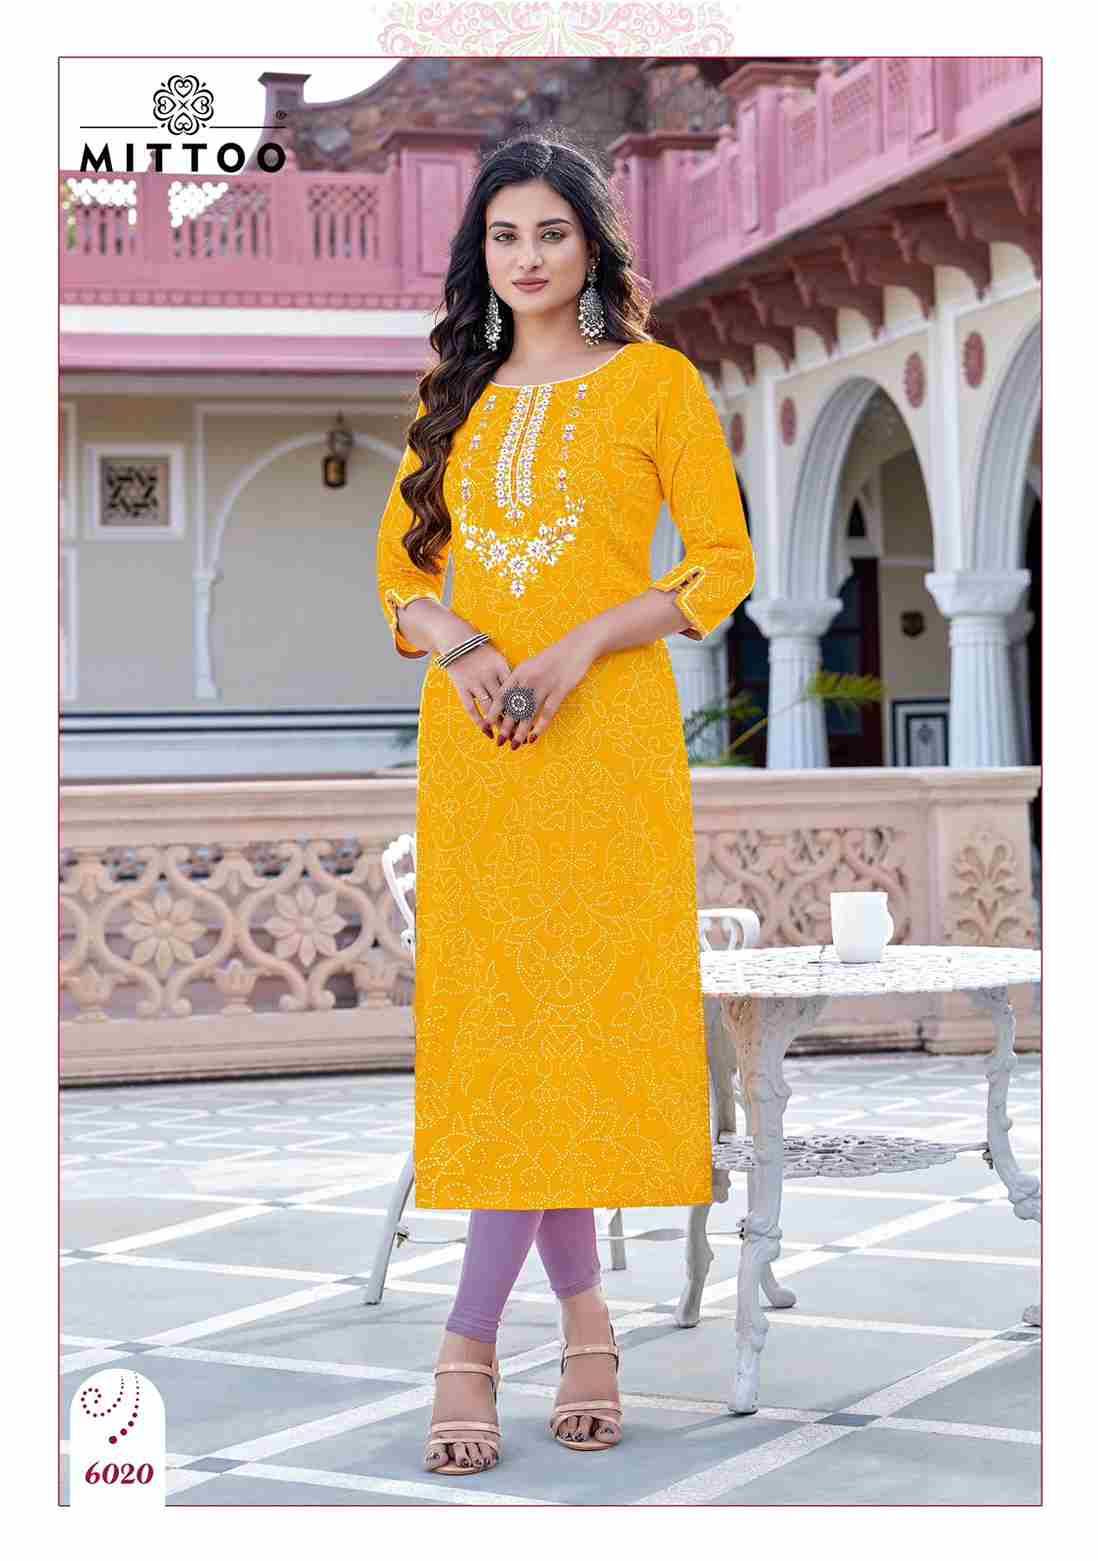 Bandhan Vol-4 By Mittoo 6019 To 6024 Series Designer Stylish Fancy Colorful Beautiful Party Wear & Ethnic Wear Collection Rayon Print Kurtis At Wholesale Price